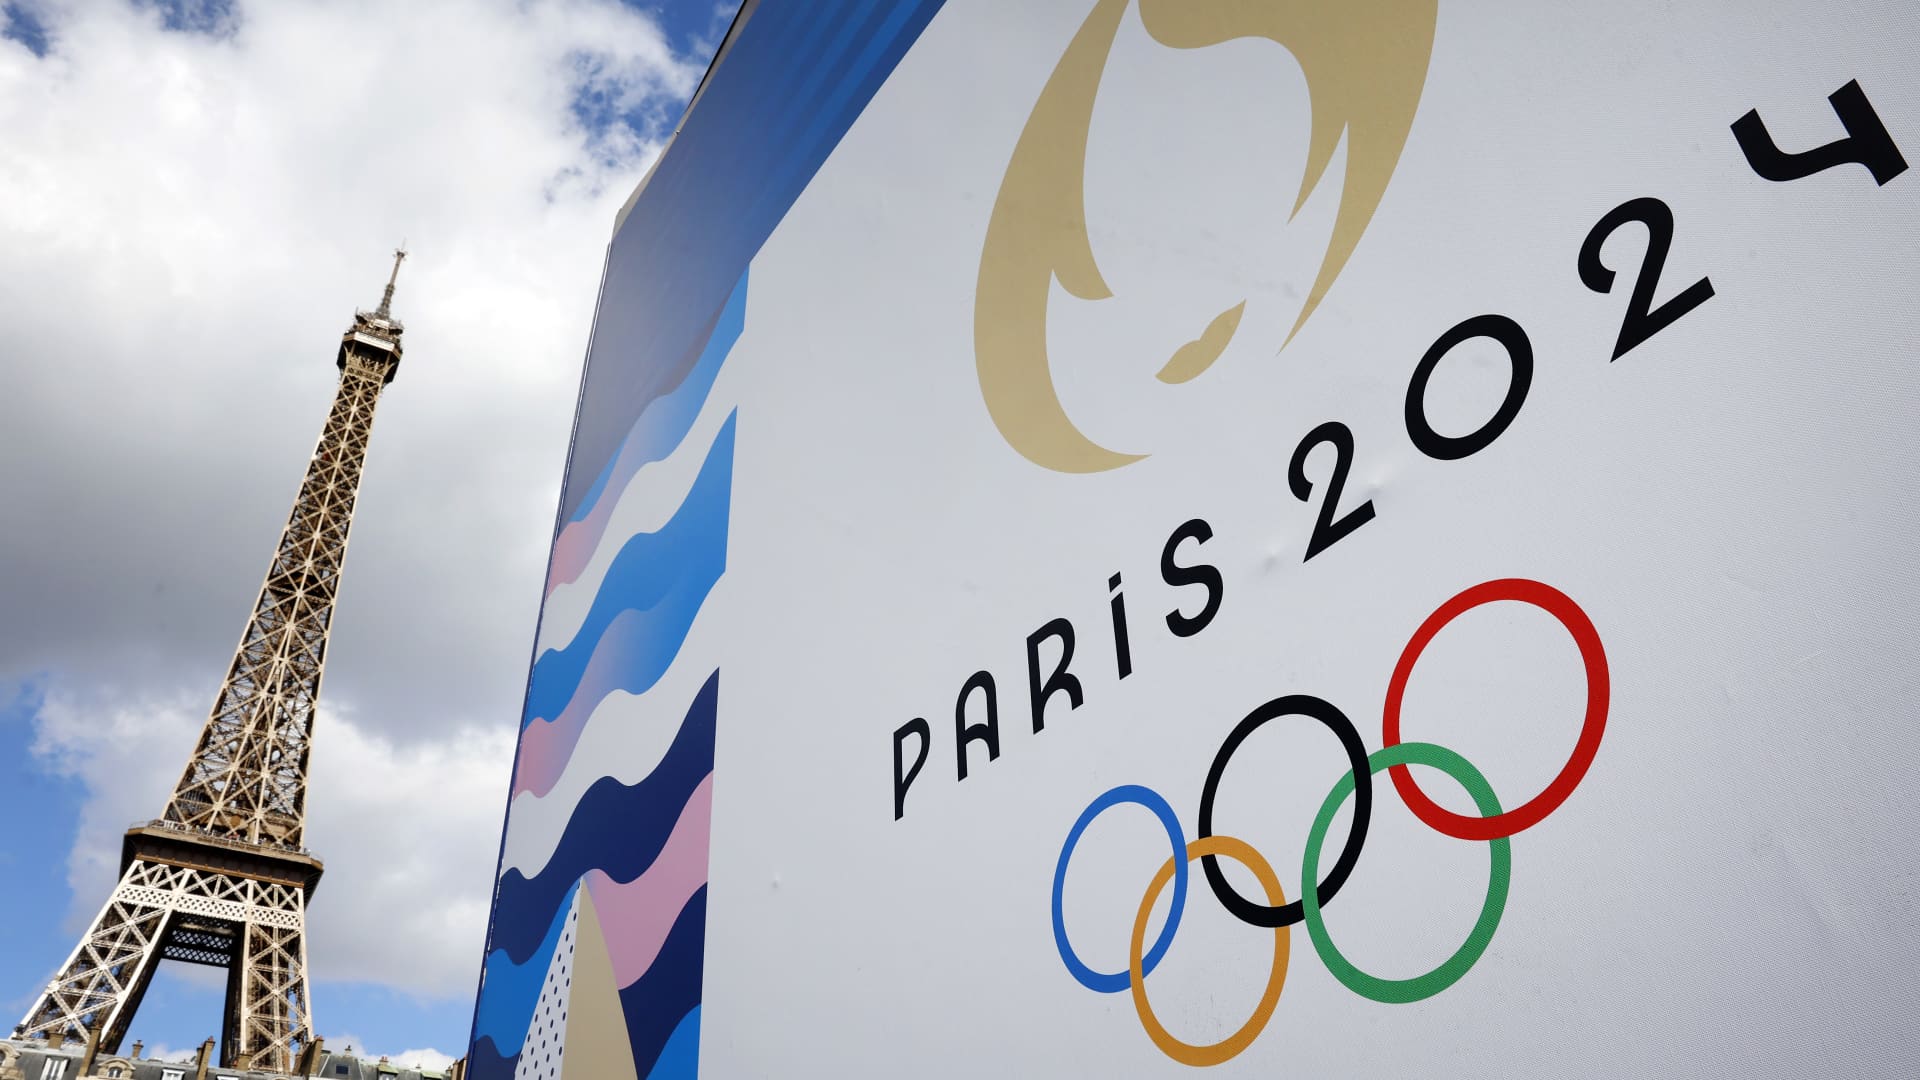 Paris Olympics is the latest test of whether sports can win subscribers for NBC's Peacock